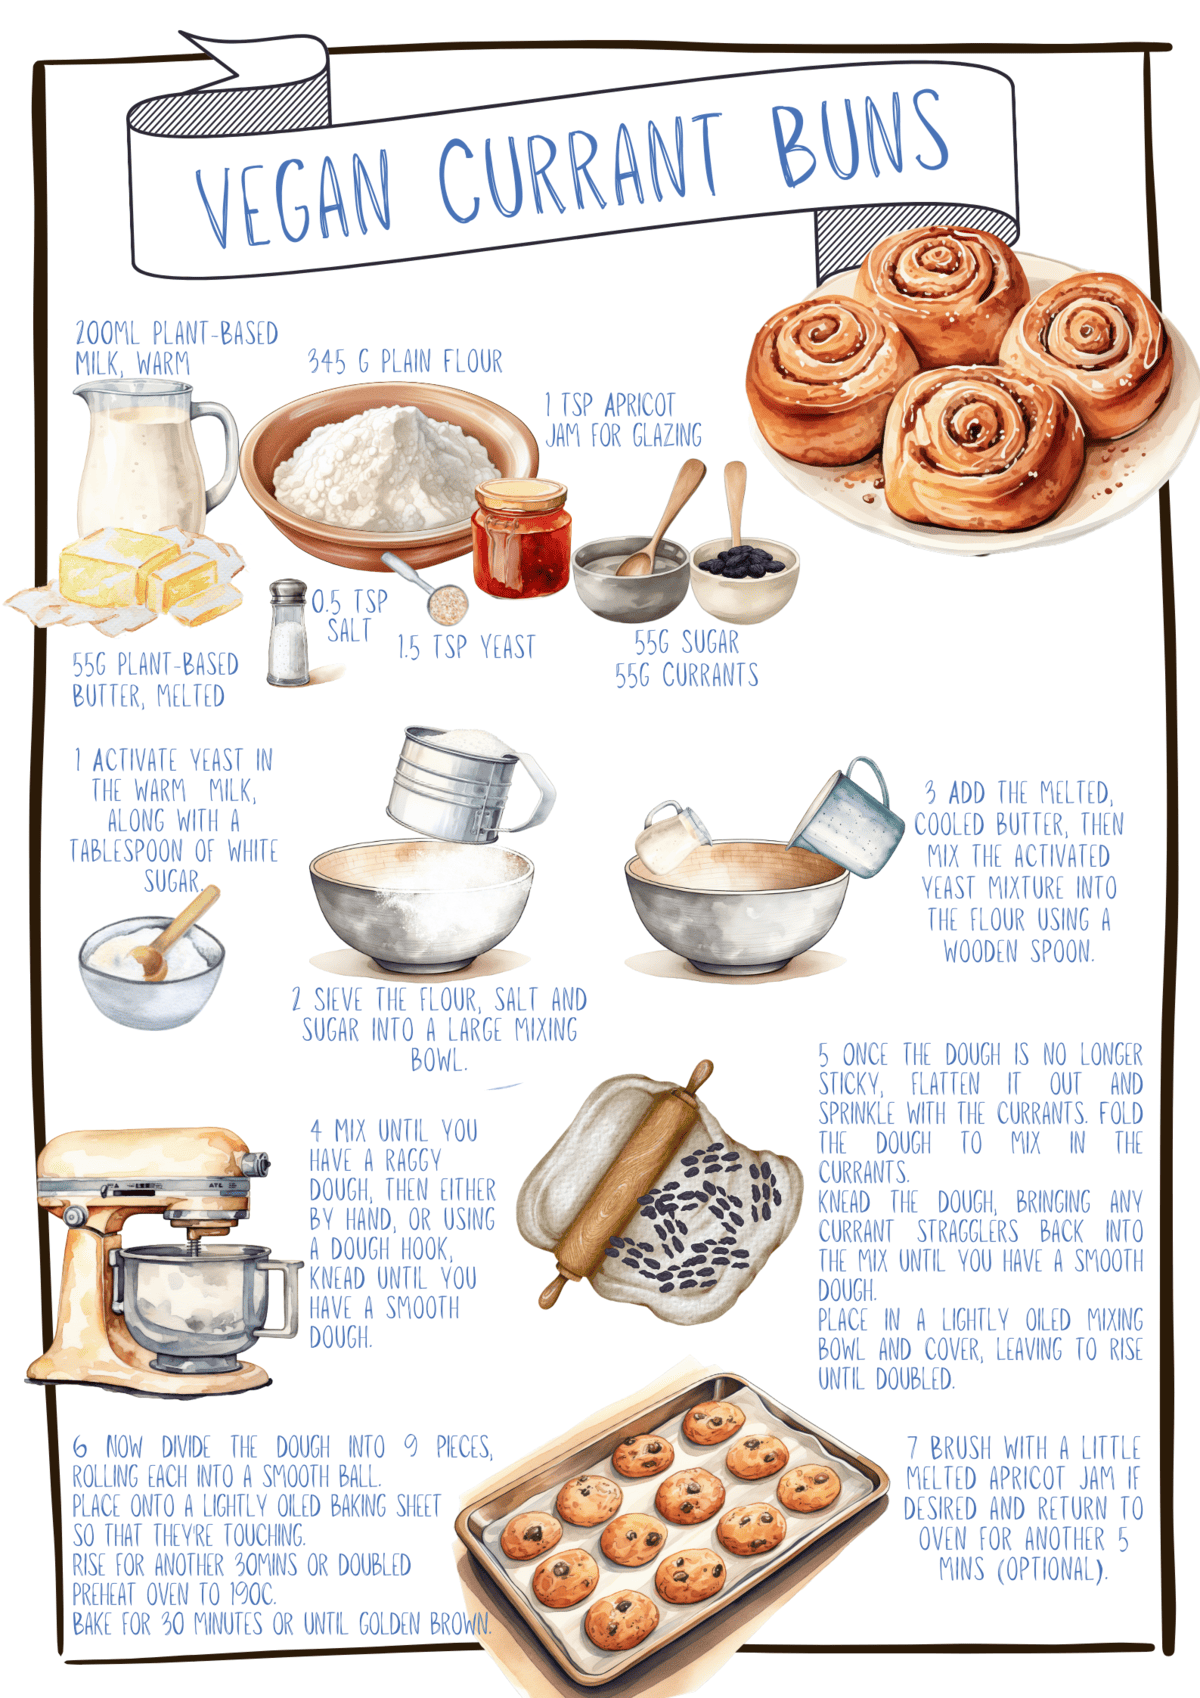 Recipe card for Currant Buns.